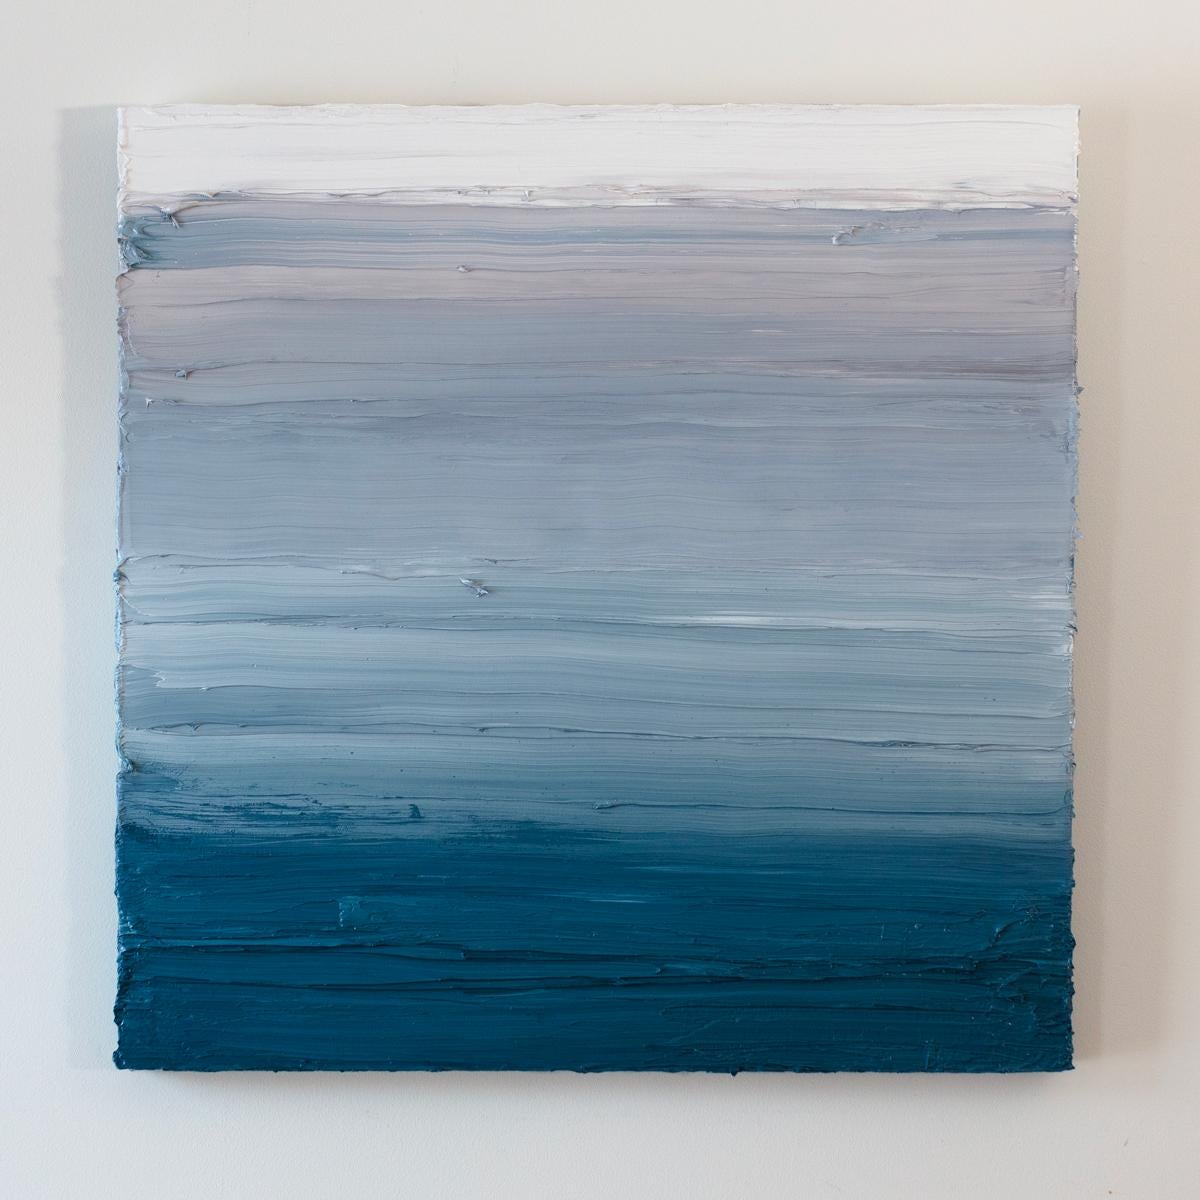 This textured abstract painting by Teodora Guererra features a blue, grey, and white palette. The artist applies thick layers of oil paint in sweeping, horizontal gestures - a process she likens to frosting a cake. The layers are blended beginning